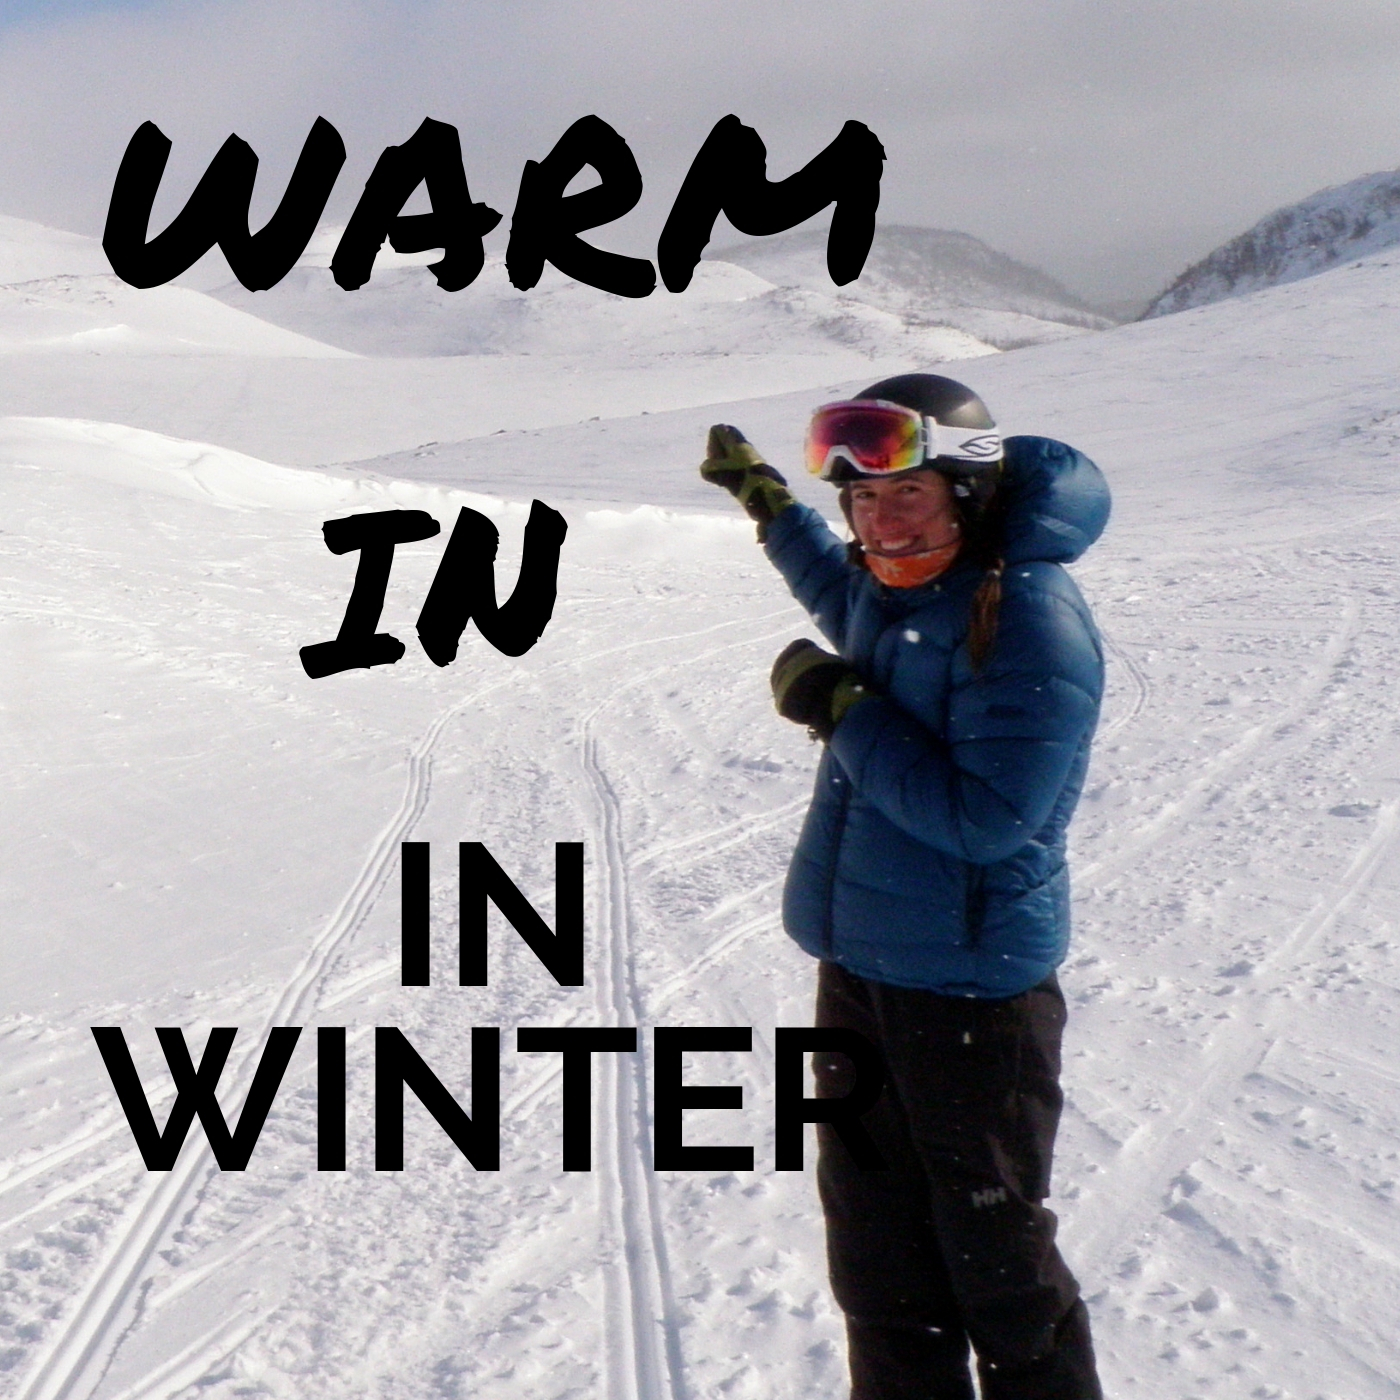 staying Warm in the winter, winter tips, winter clothing, Wildly Intrepid, Lewis Hills